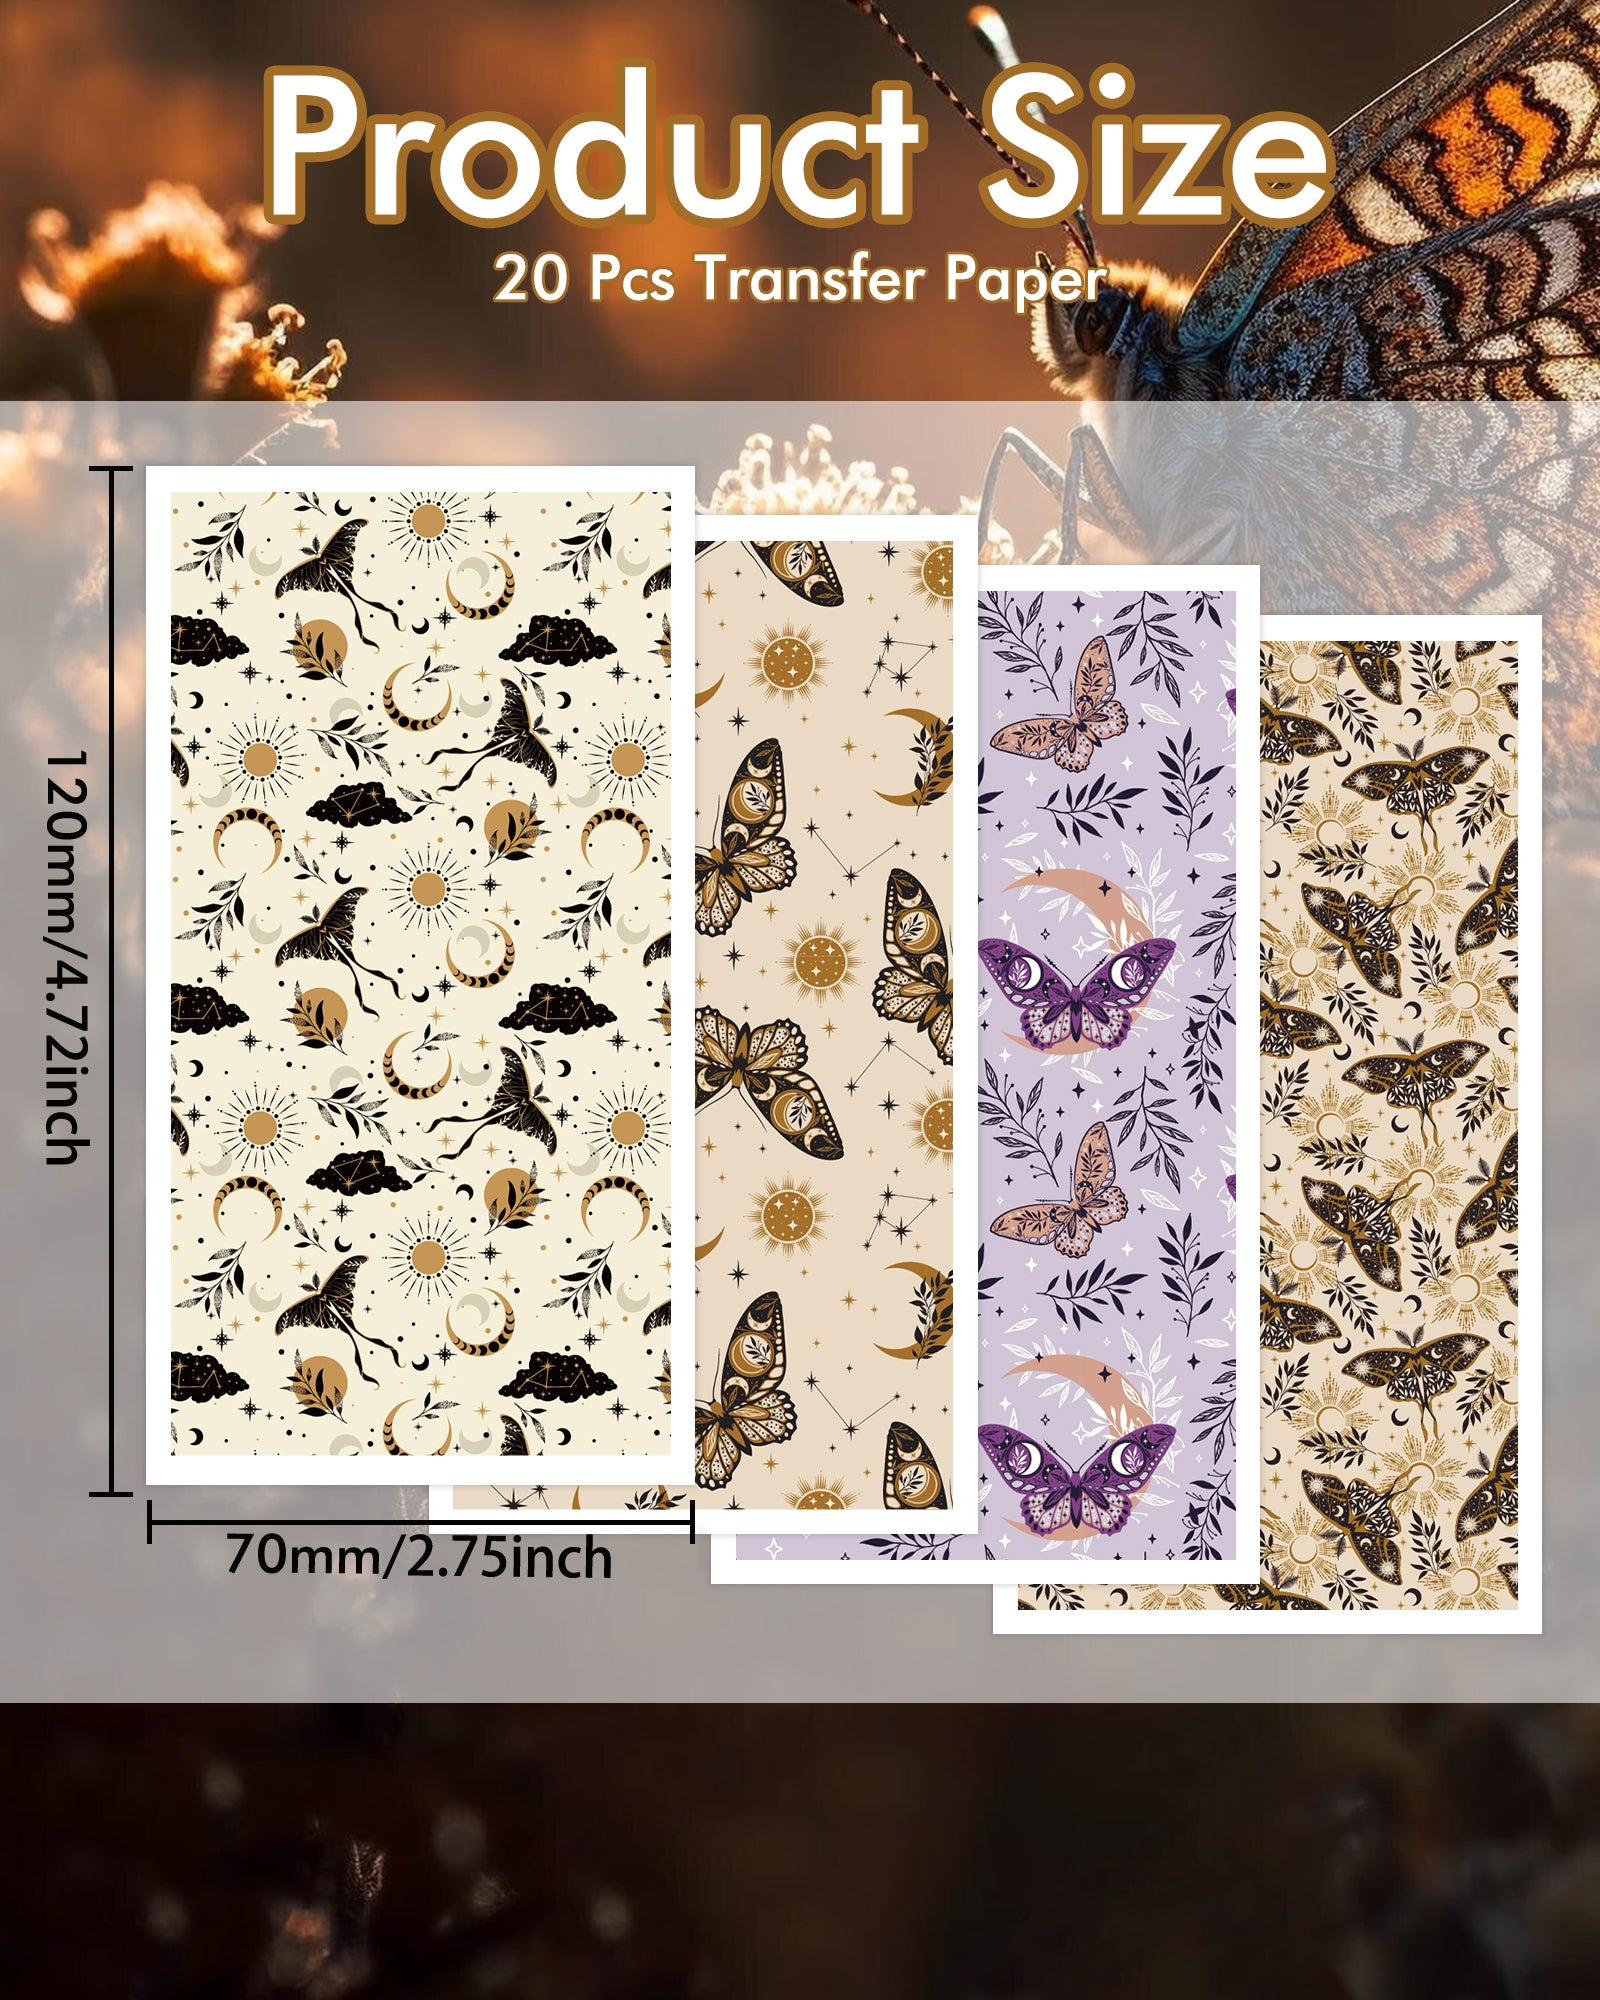 Puocaon Mystic Moth Polymer Clay Transfer Paper 20 pcs